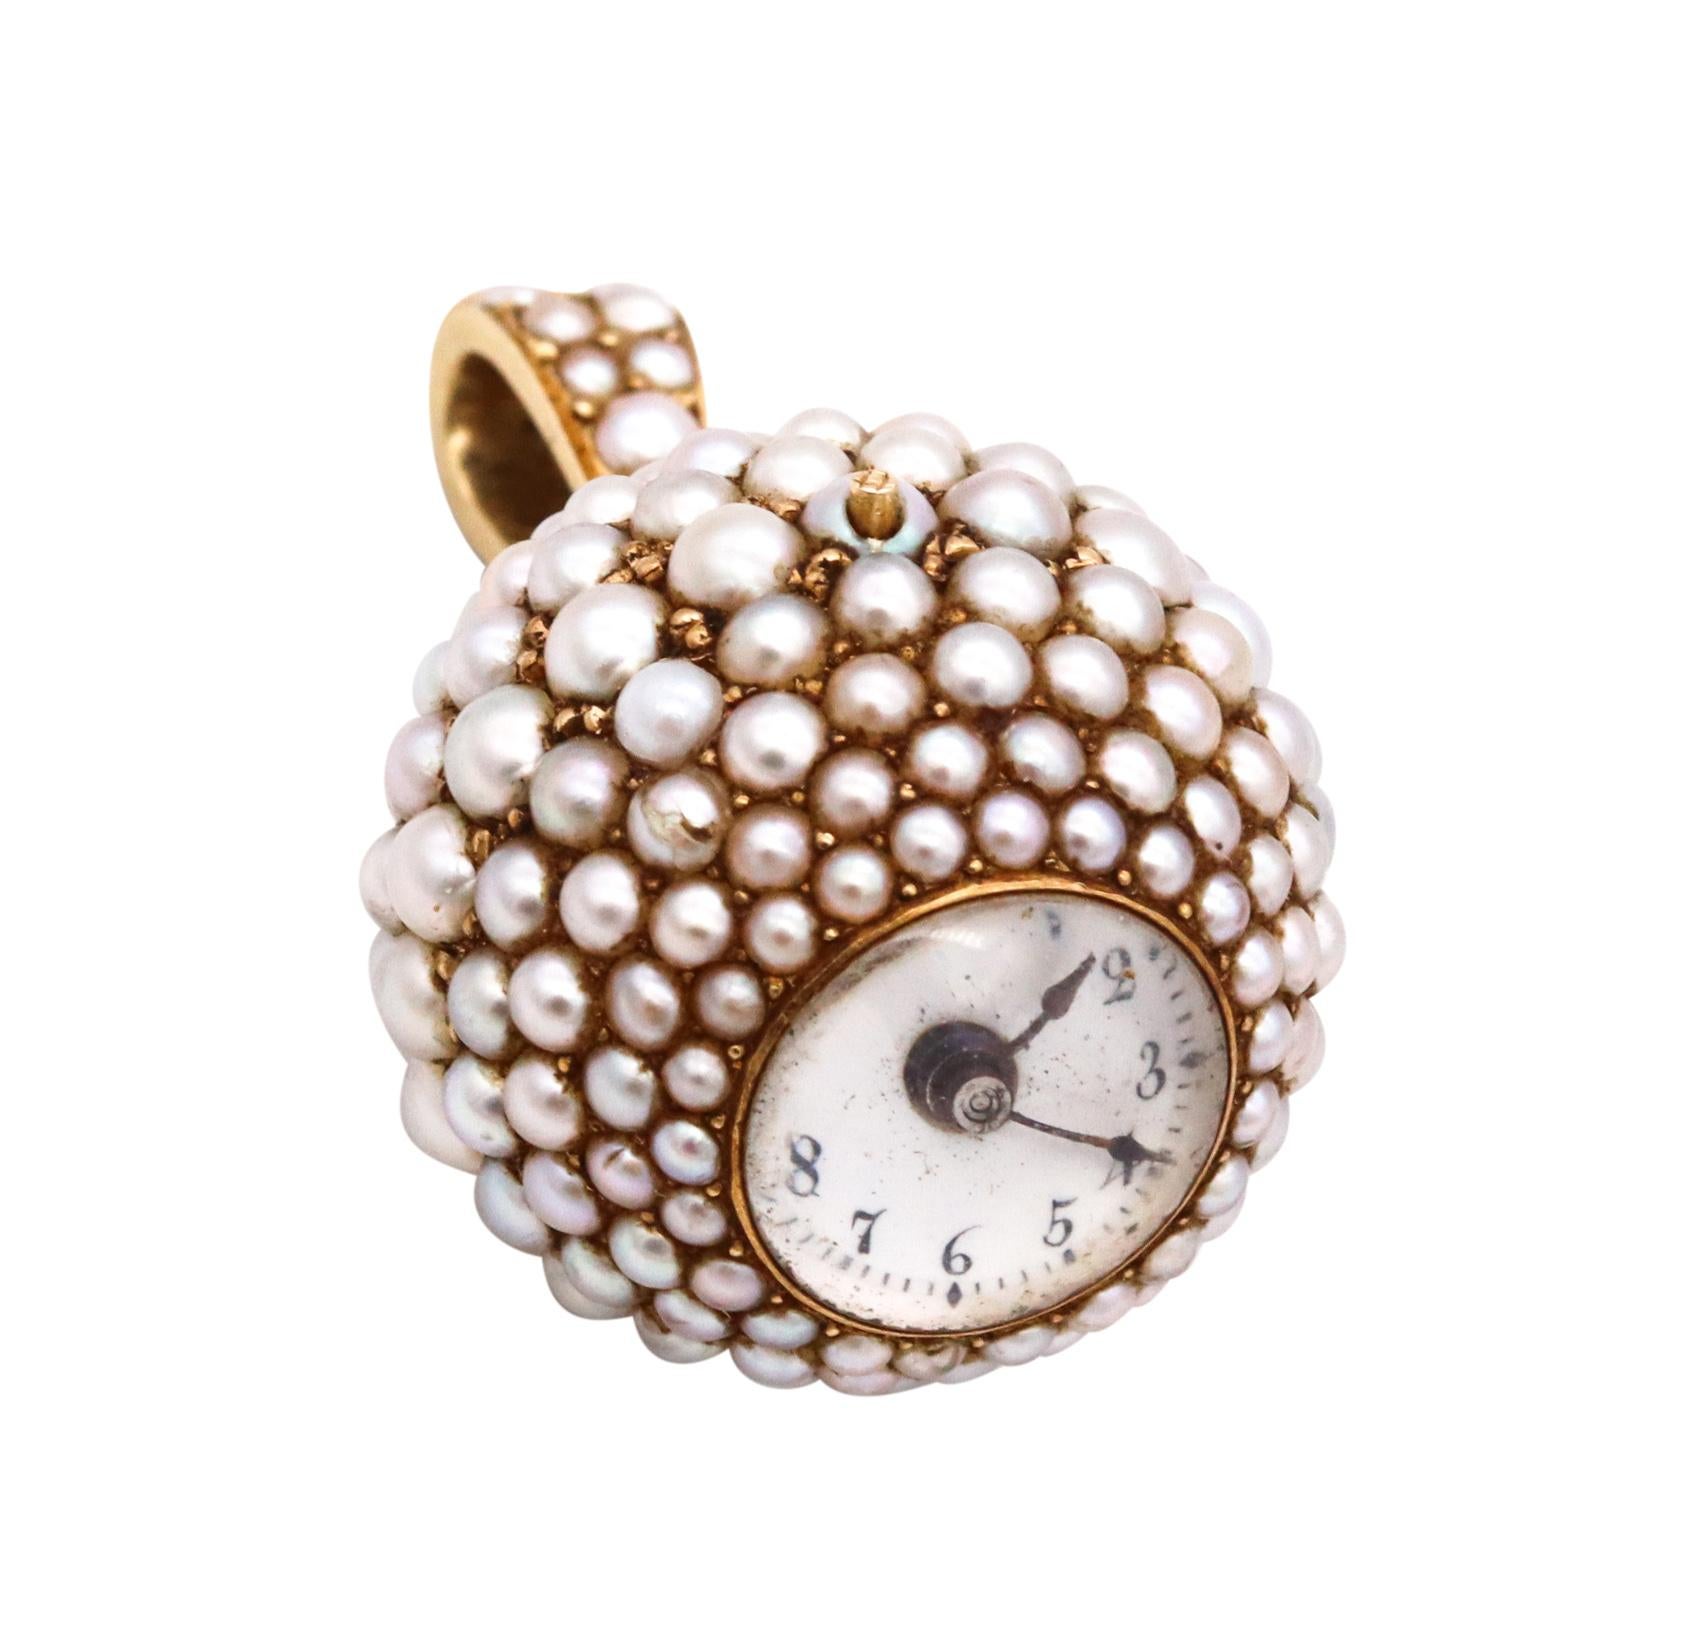 Art Deco 1930 European Spherical Watch Pendant In 18Kt Gold With Gradated Pearls 3